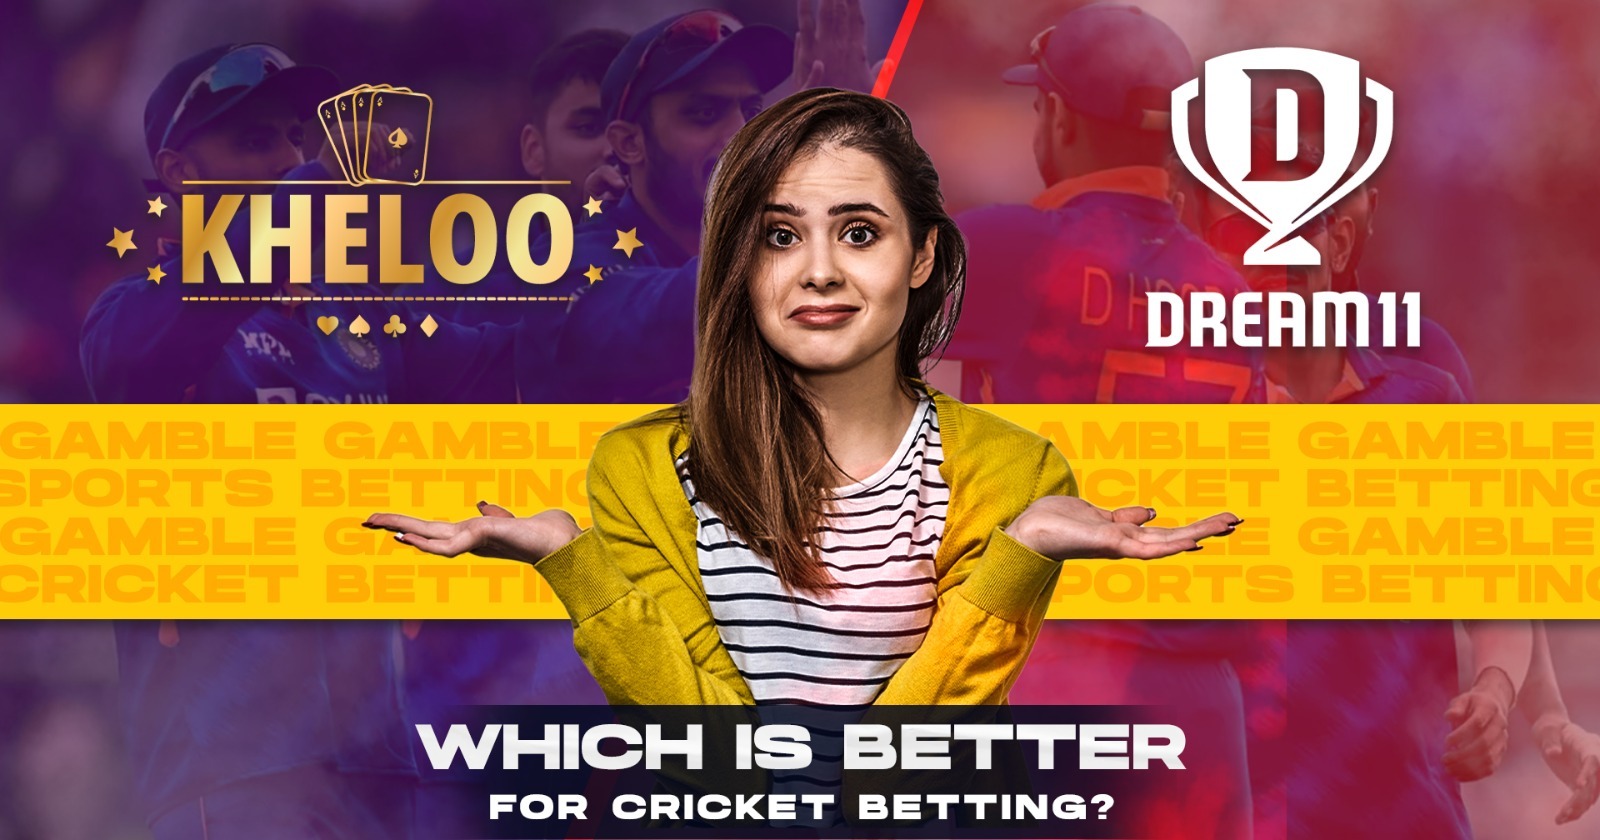 Kheloo or Dream11 - Which is Better for Cricket Betting - Kheloo